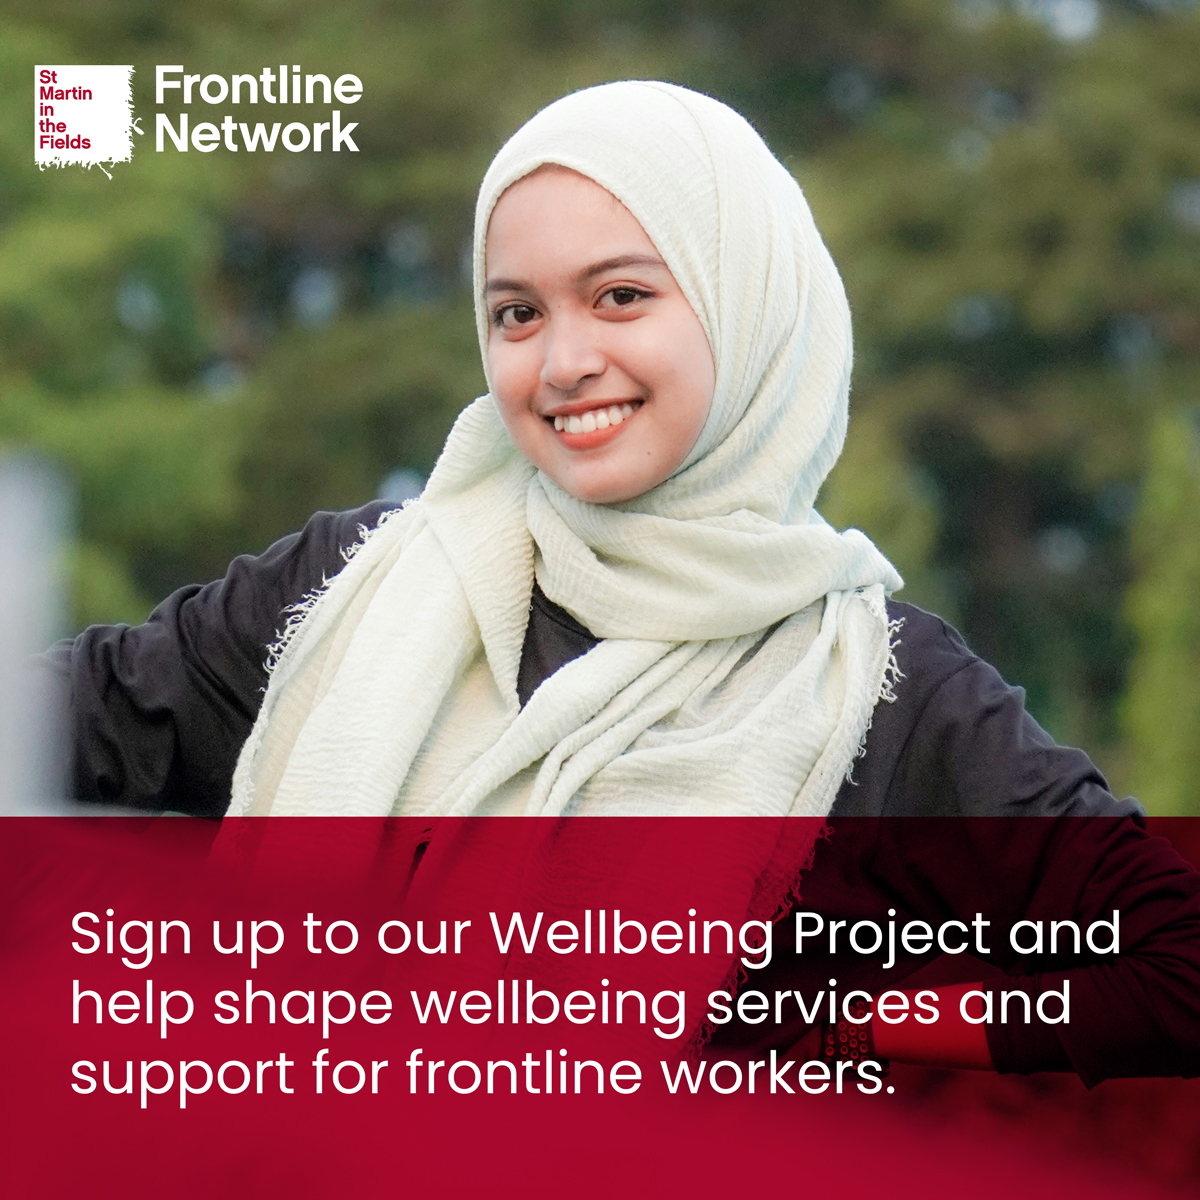 You have until 2nd April, to sign up to our #Wellbeing project, in partnership with @LSEnews & @homelessimpact. We want to improve #homelessness frontline worker wellbeing, as we know the sector is struggling. Signing up could help your wellbeing: tinyurl.com/FLWwellbeing